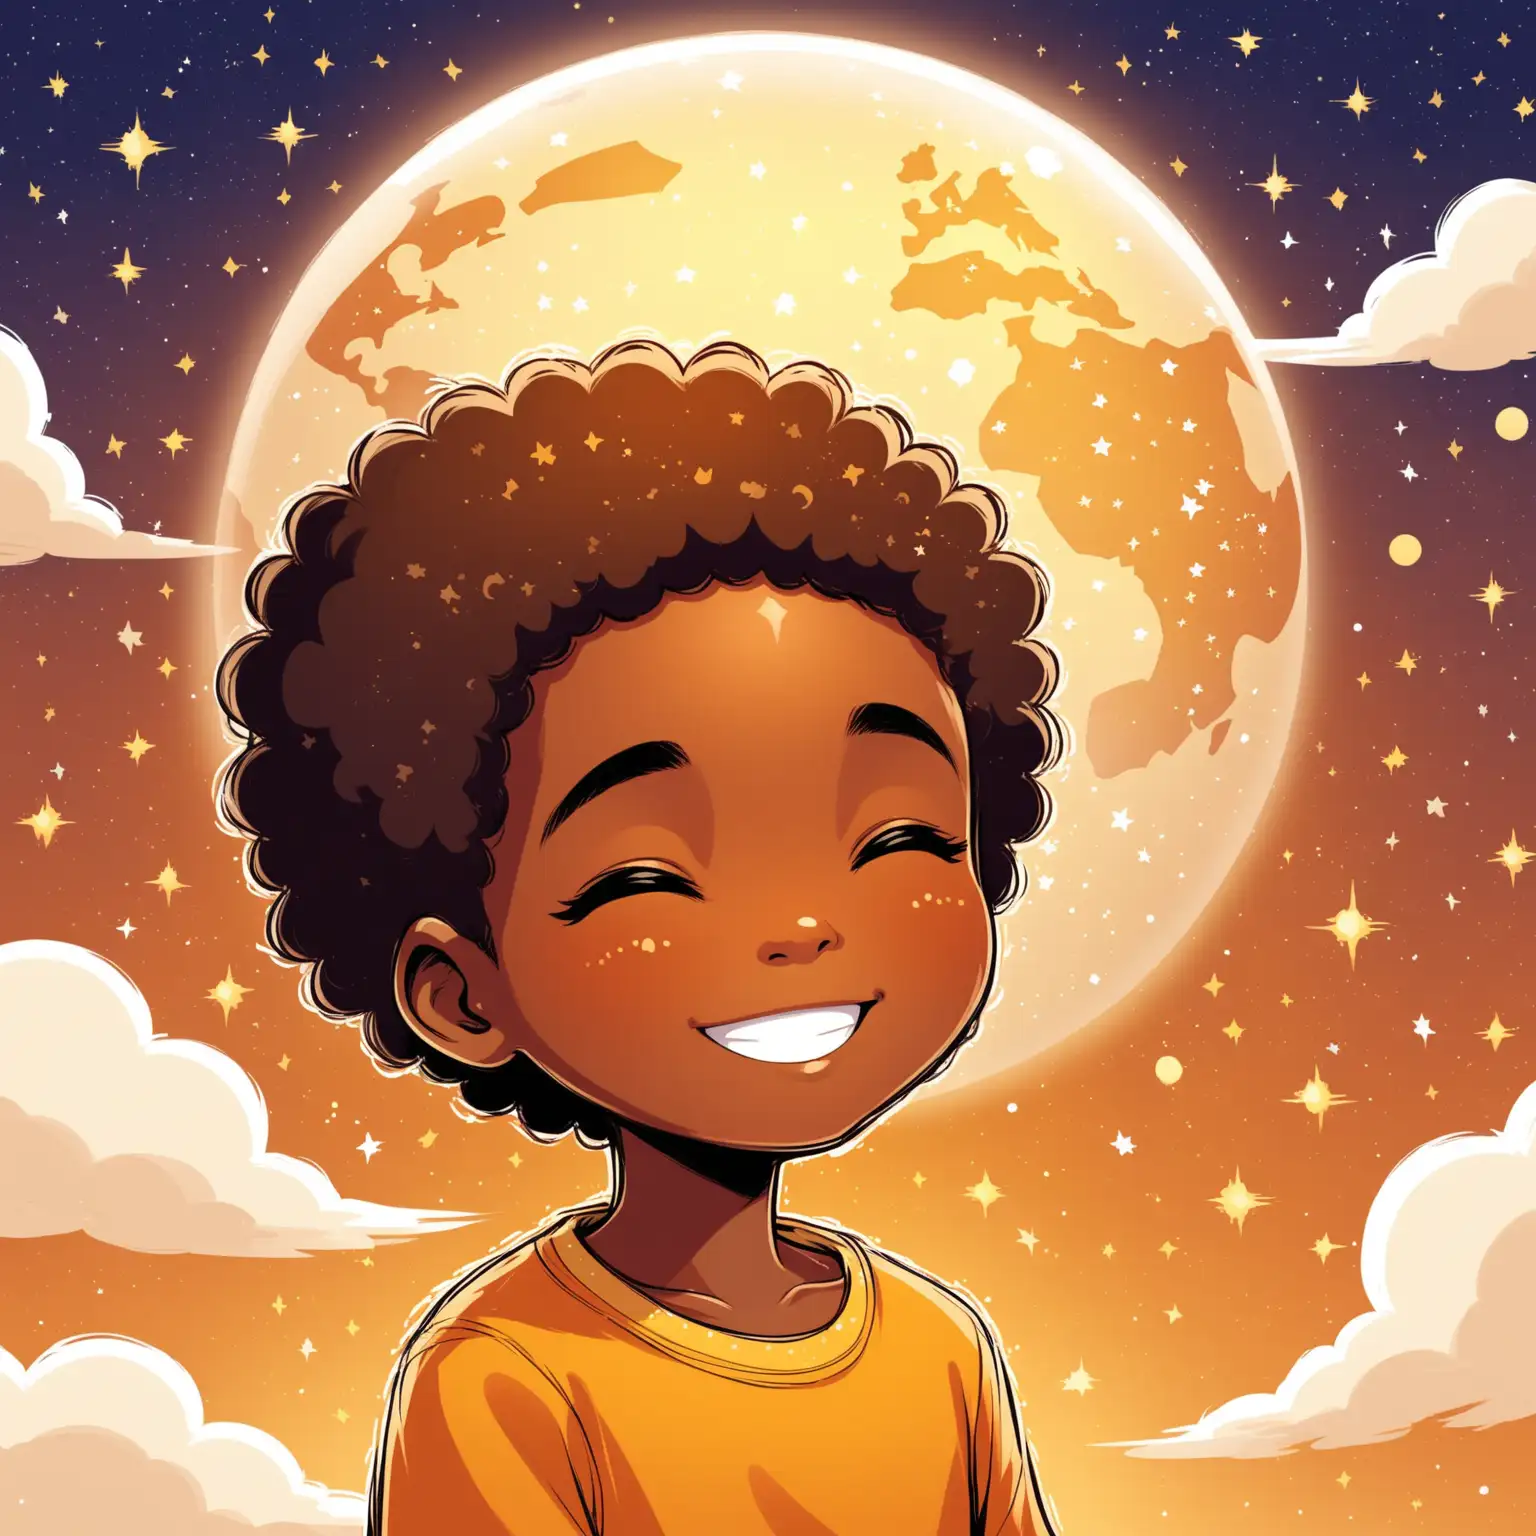 Illustrate an image of 7 year old african boy with short hair, smiling, dreaming about an united africa. Cartoon style.